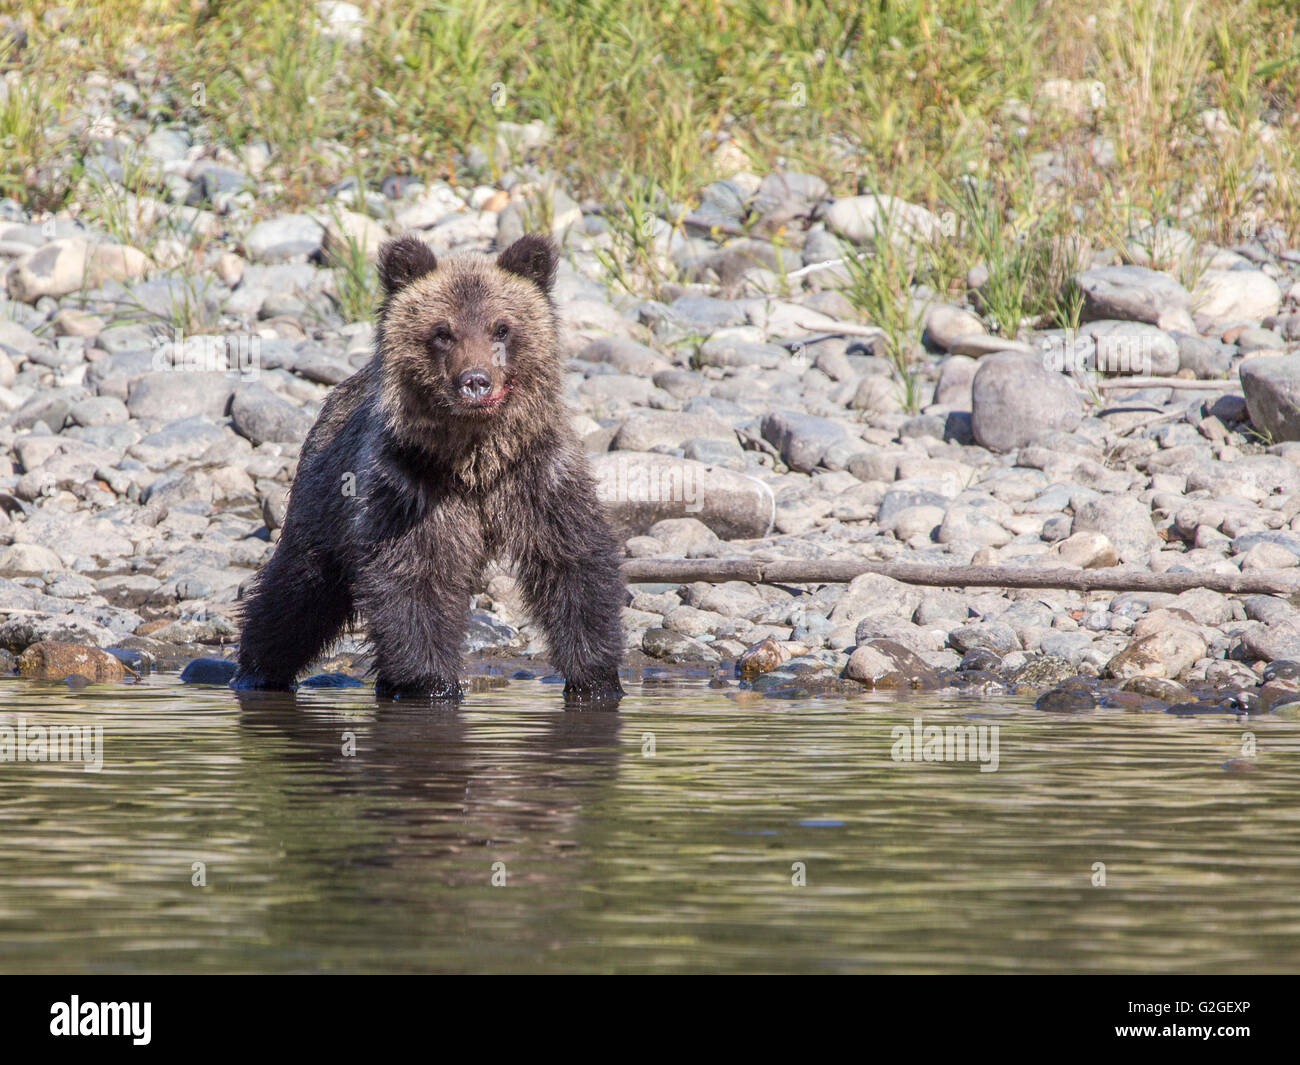 A Grizzly Bear Cub standing in a river Stock Photo